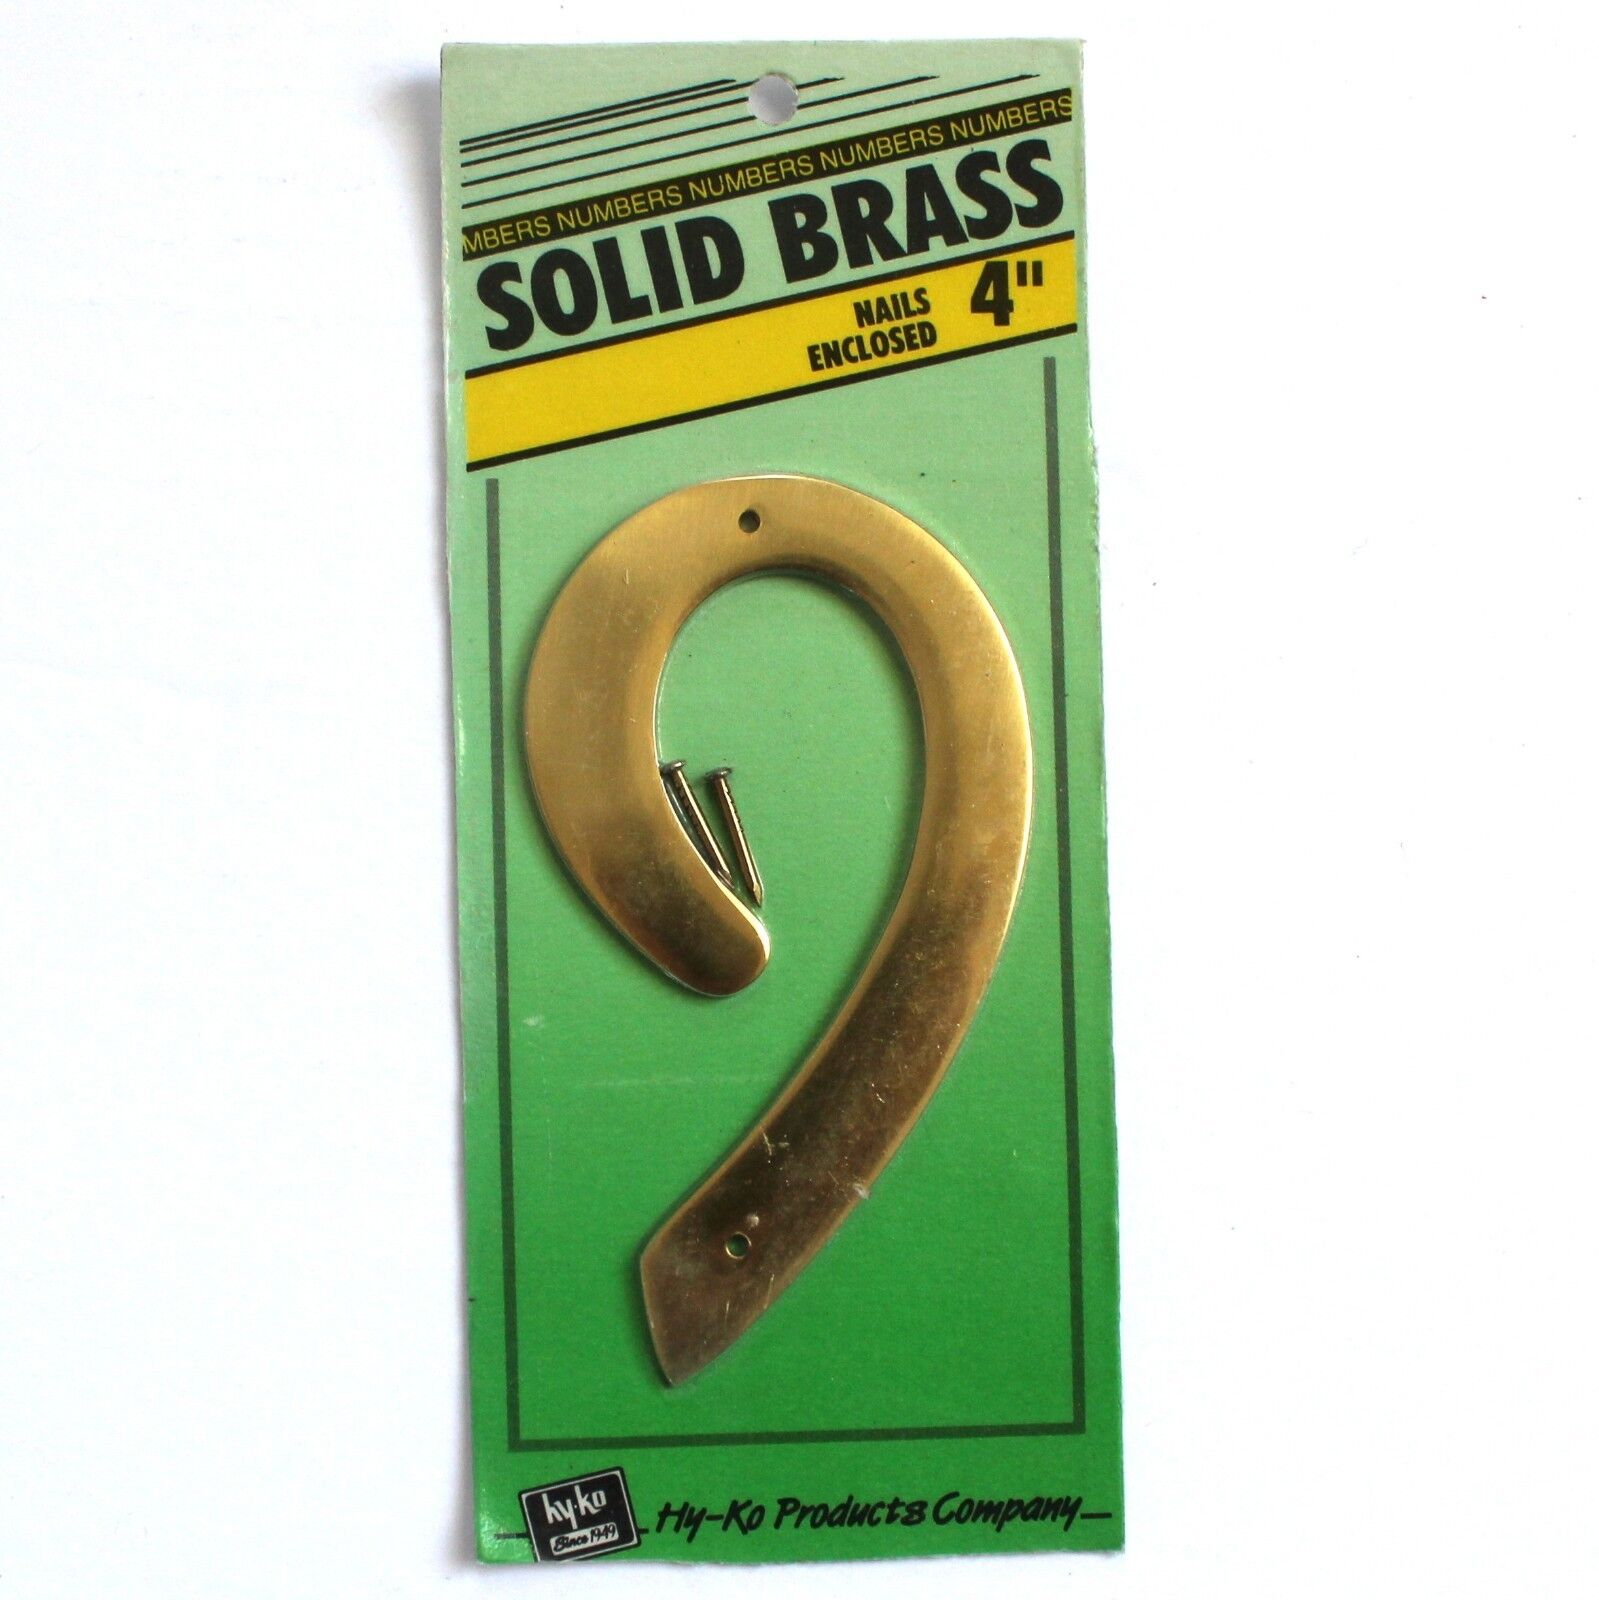 NEW Deadstock Vintage Solid Brass House Number # 9 or 6 4\